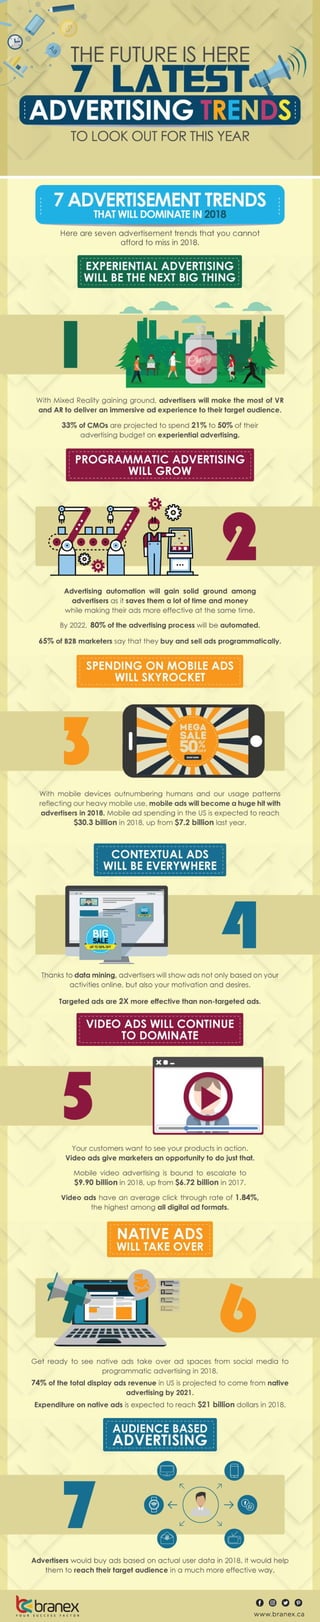 Latest Advertising trends 2018 infographic